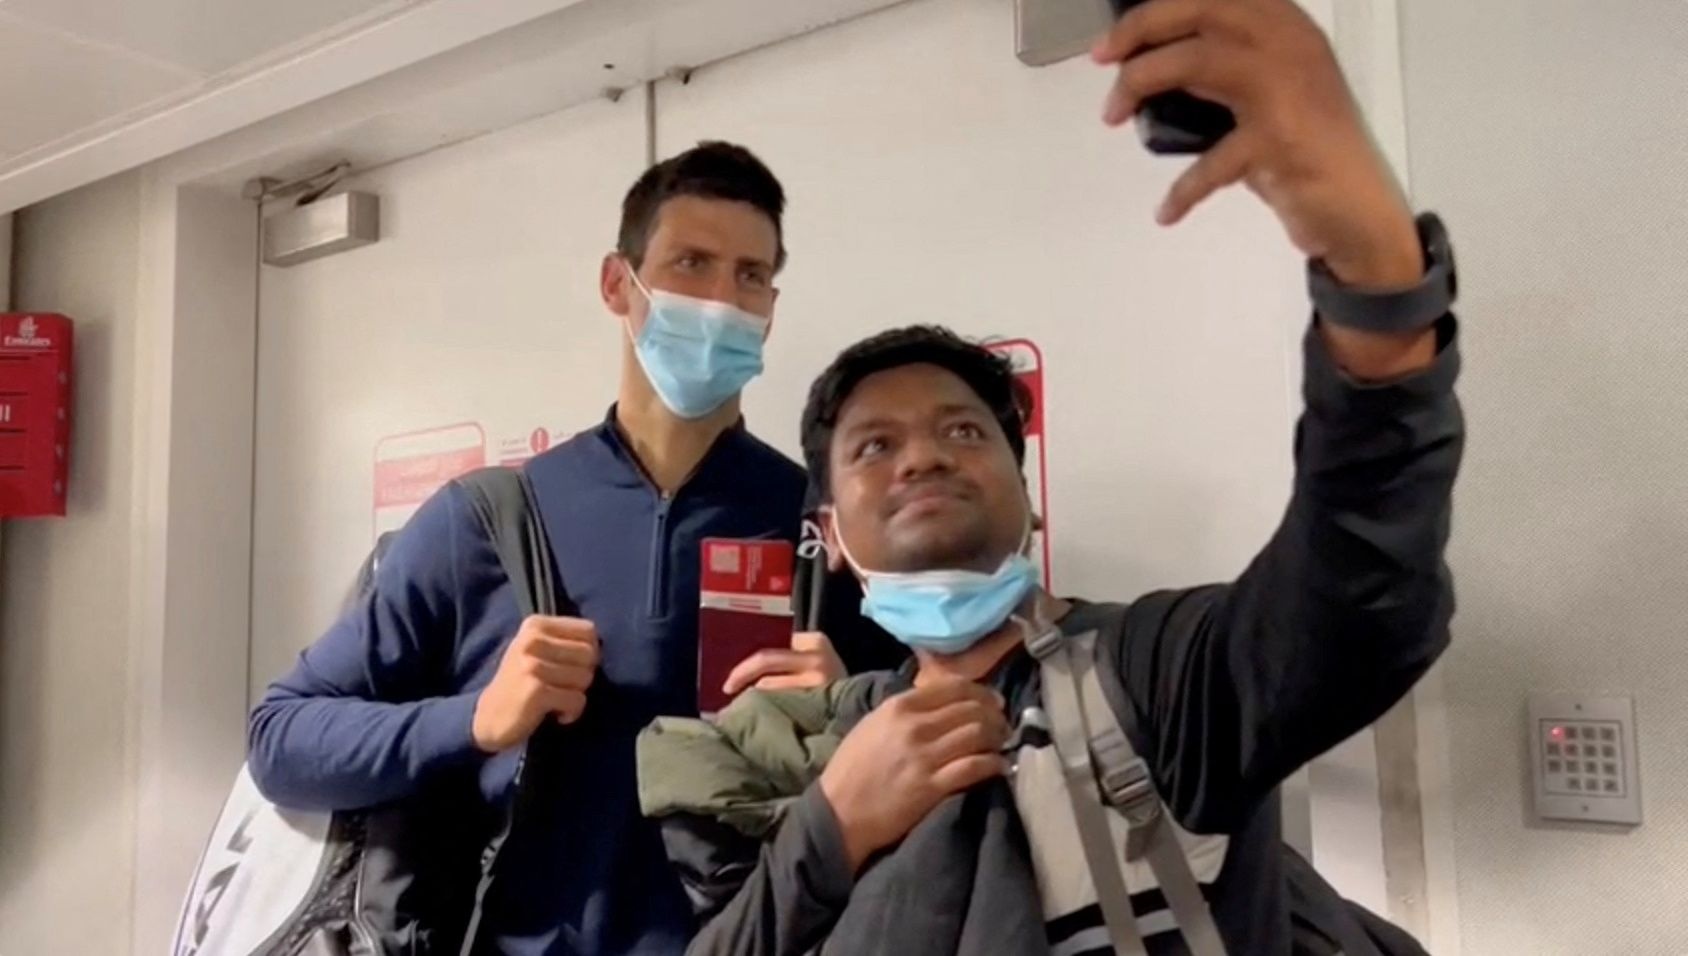 Novak Djokovic poses for a selfie after landing at Dubai Airport after the Australian Federal Court upheld a government decision to cancel his visa to play in the Australian Open, in Dubai, United Arab Emirates, January 17, 2022.